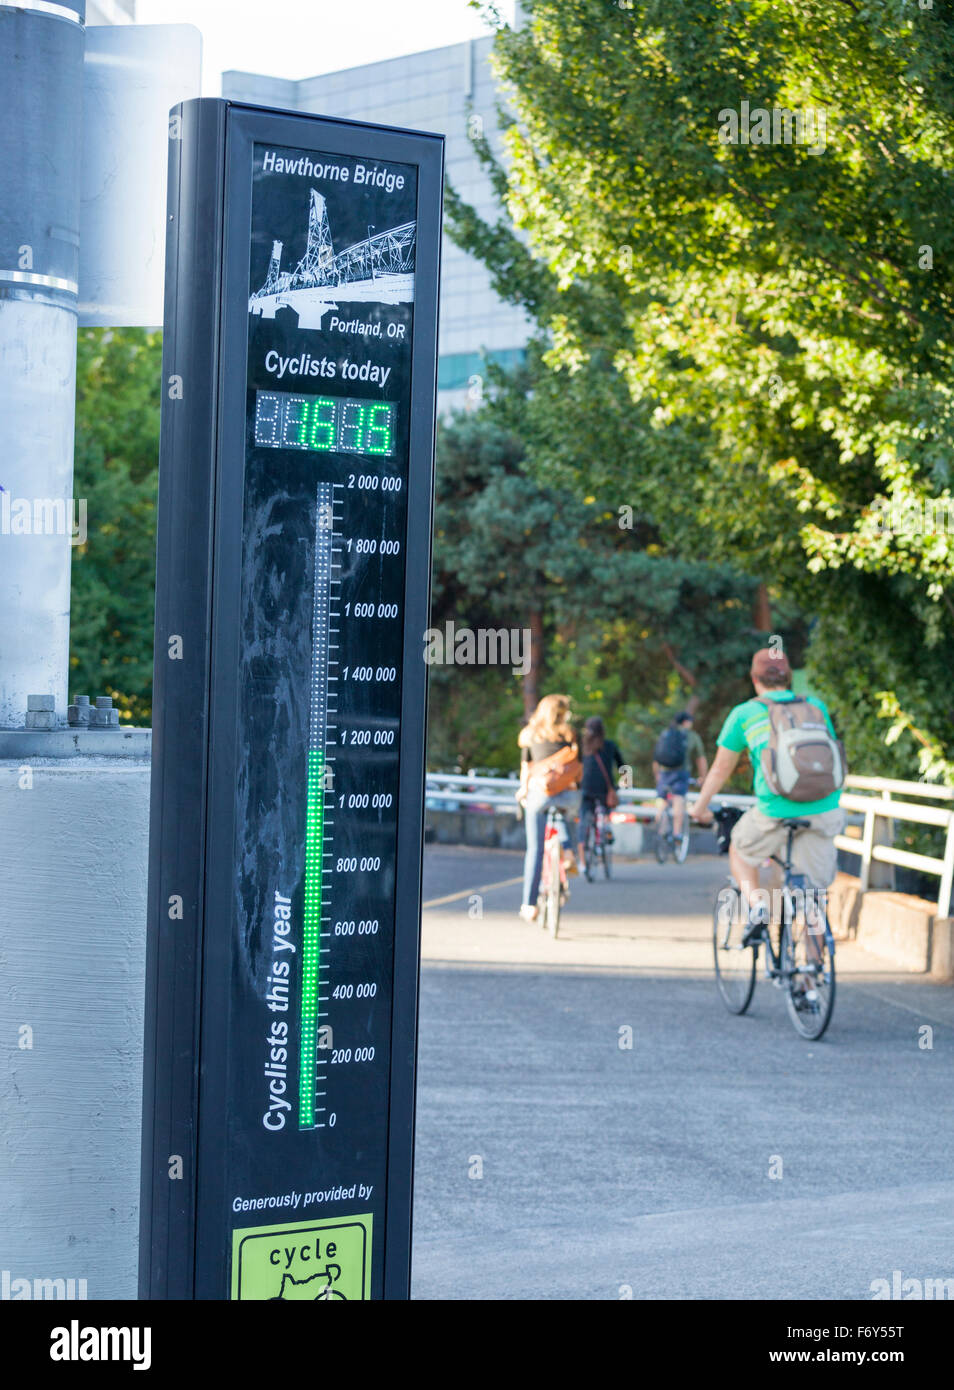 The 1,615th cyclist of the day crosses over the Hawthorne Bridge in Portland, Oregon. Stock Photo